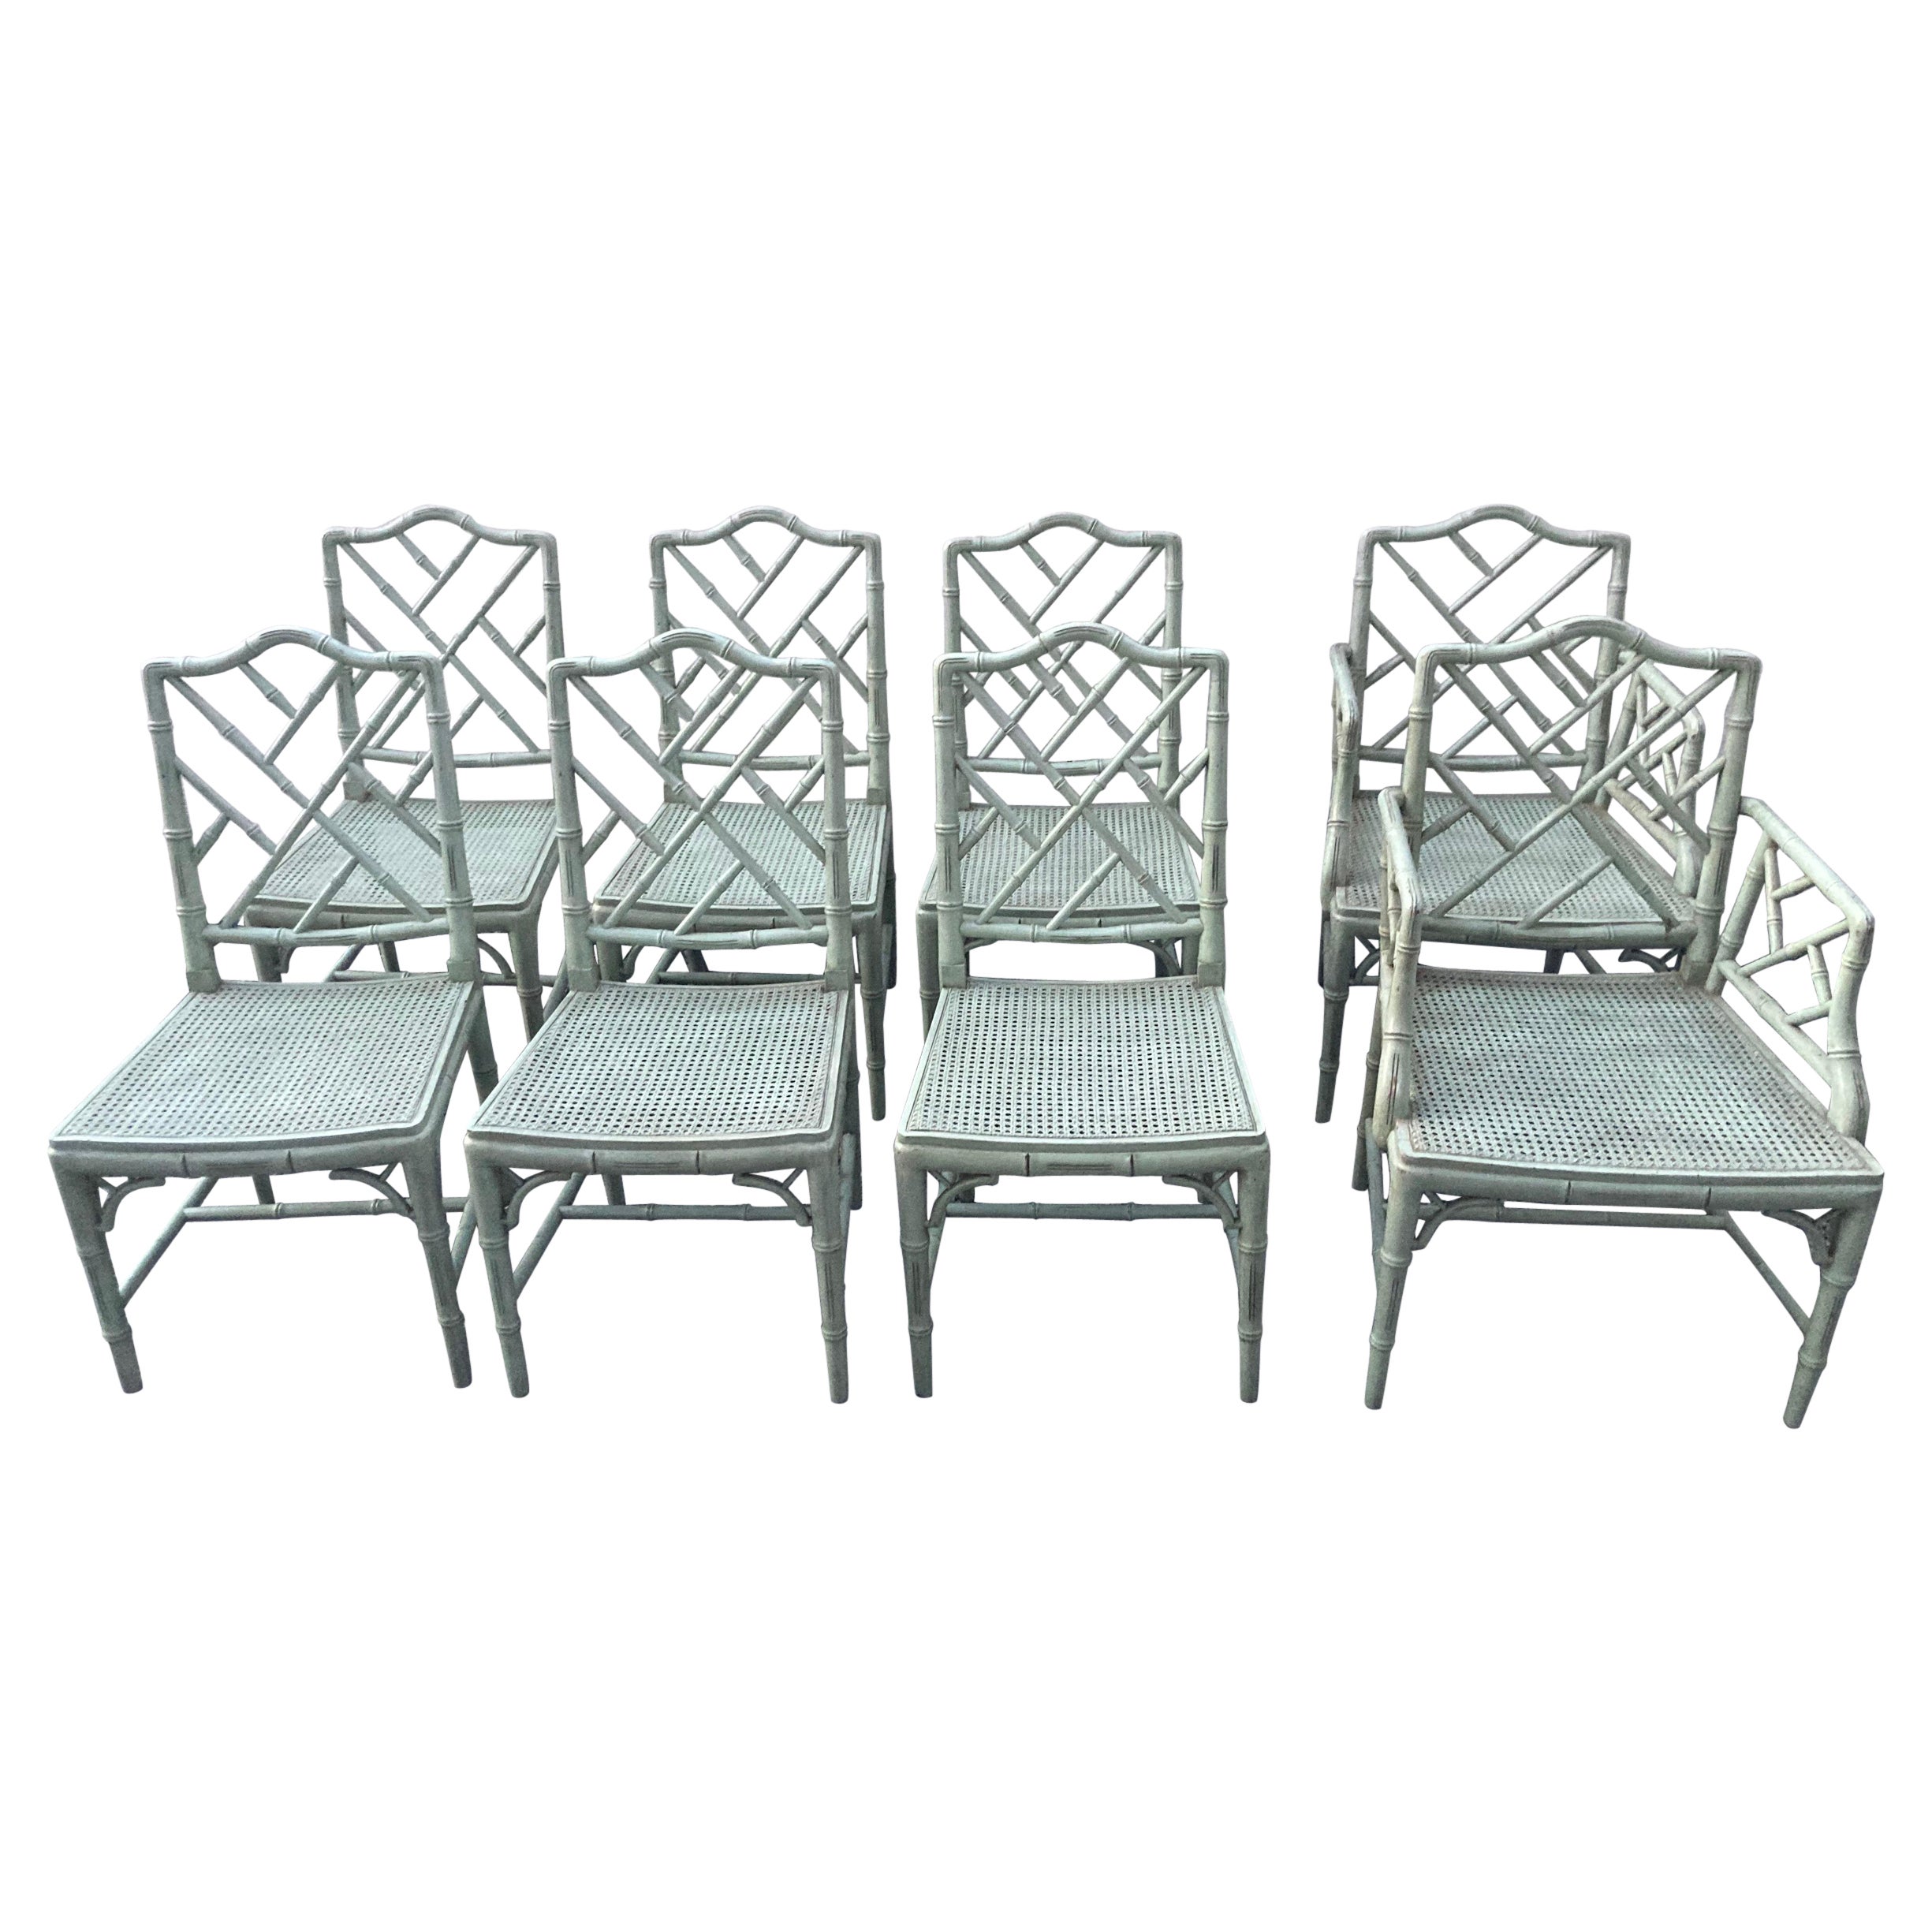 Set of 8 Chinese Chippendale Style Faux Bamboo Dining Chairs